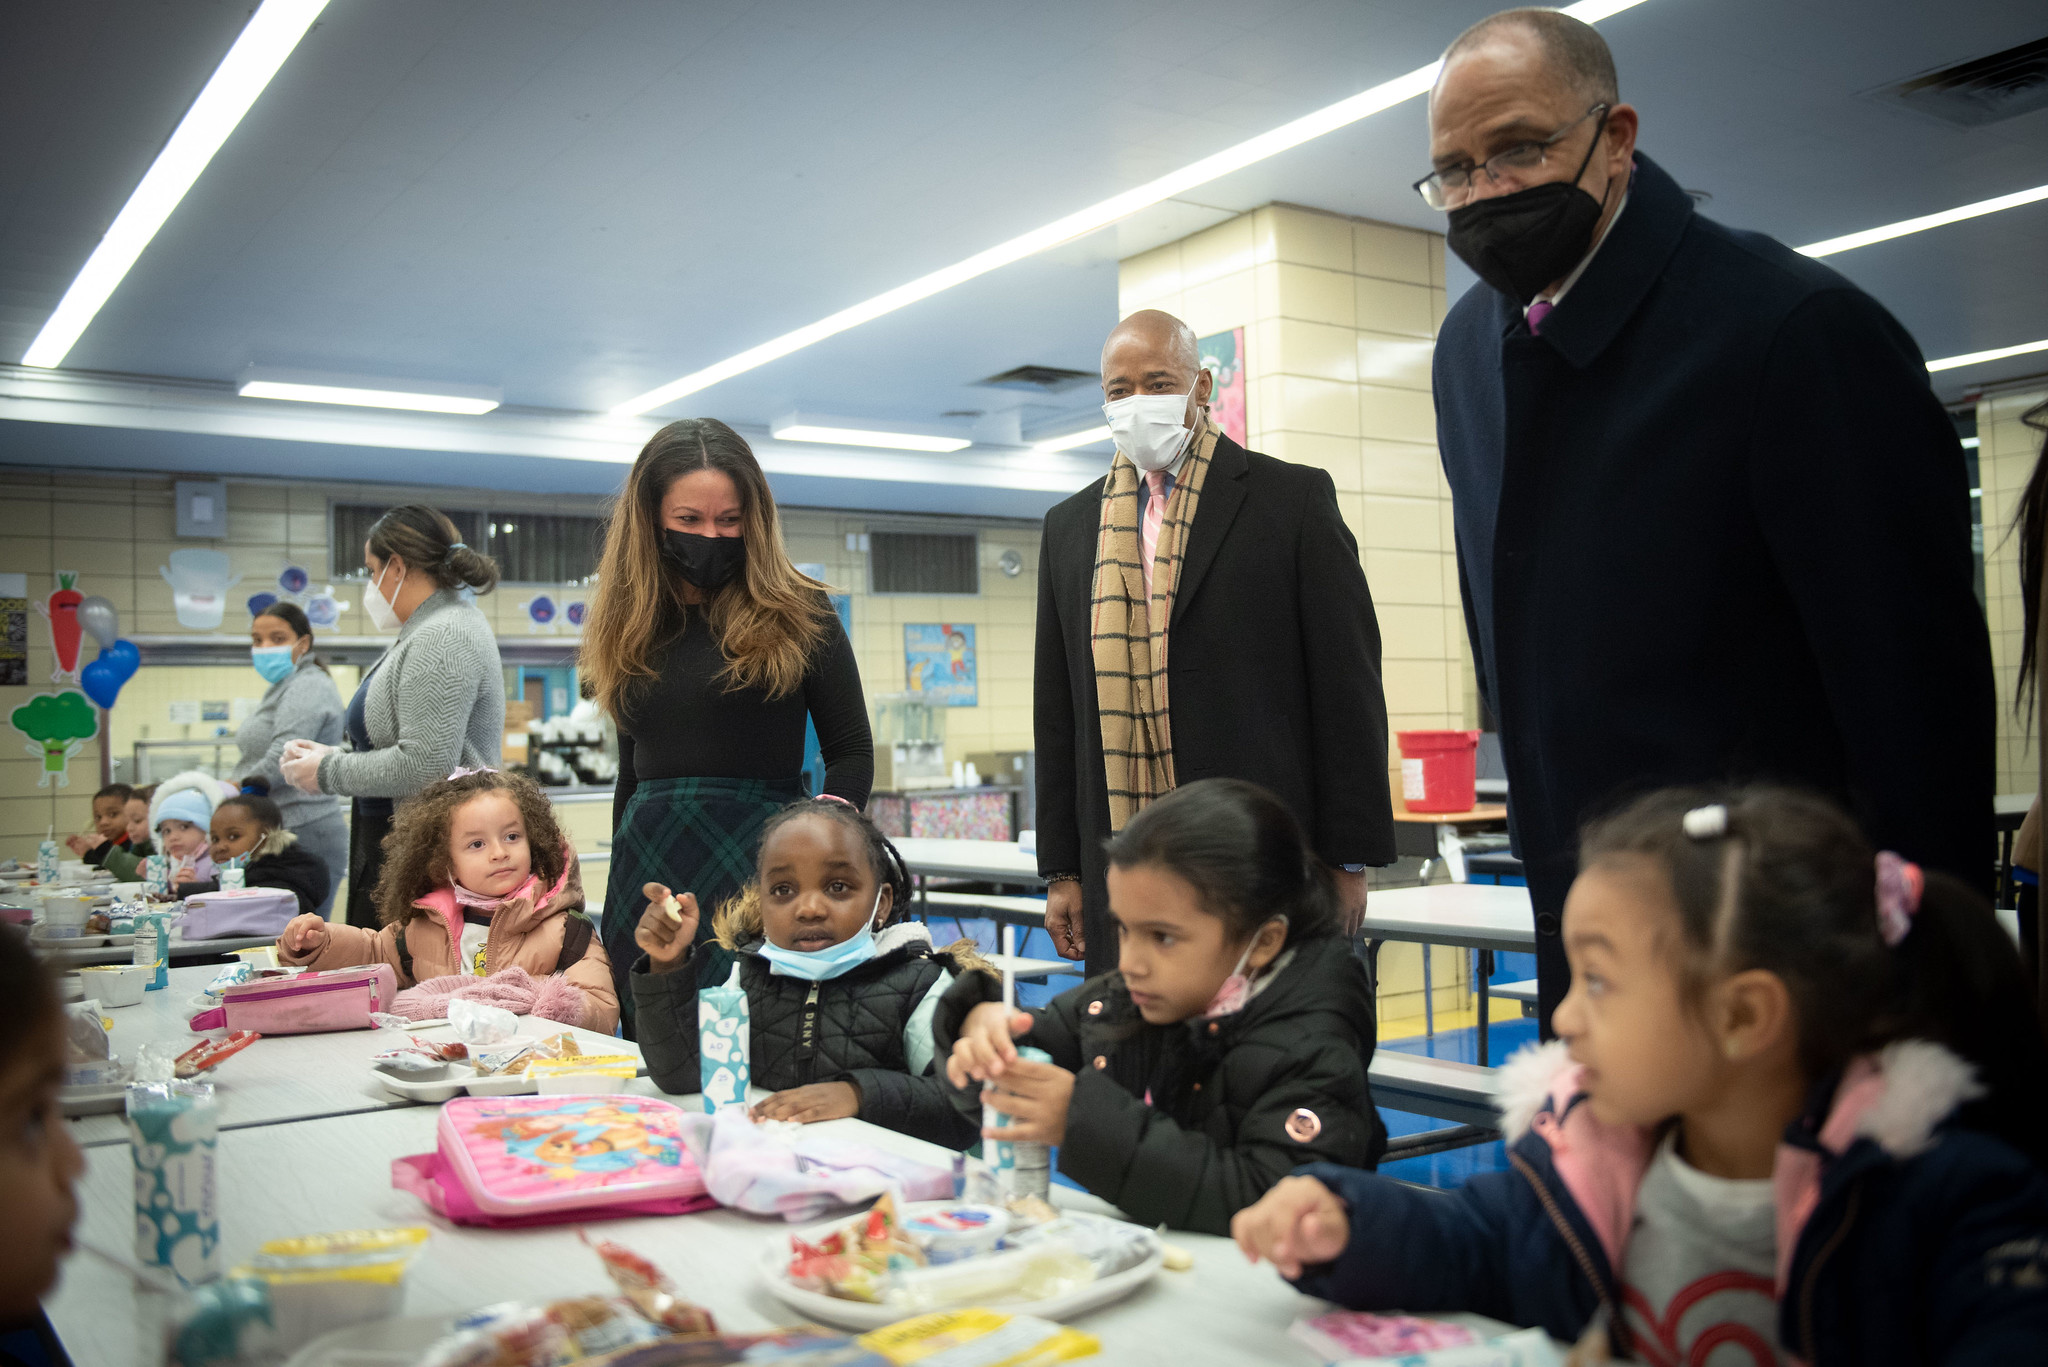 Mayor Eric Adams visits Concourse Village Elementary School in the Bronx with Schools Chancellor David Banks and local elected leaders as they greet students and parents who are returning from holiday break on Monday, January 3, 2022.